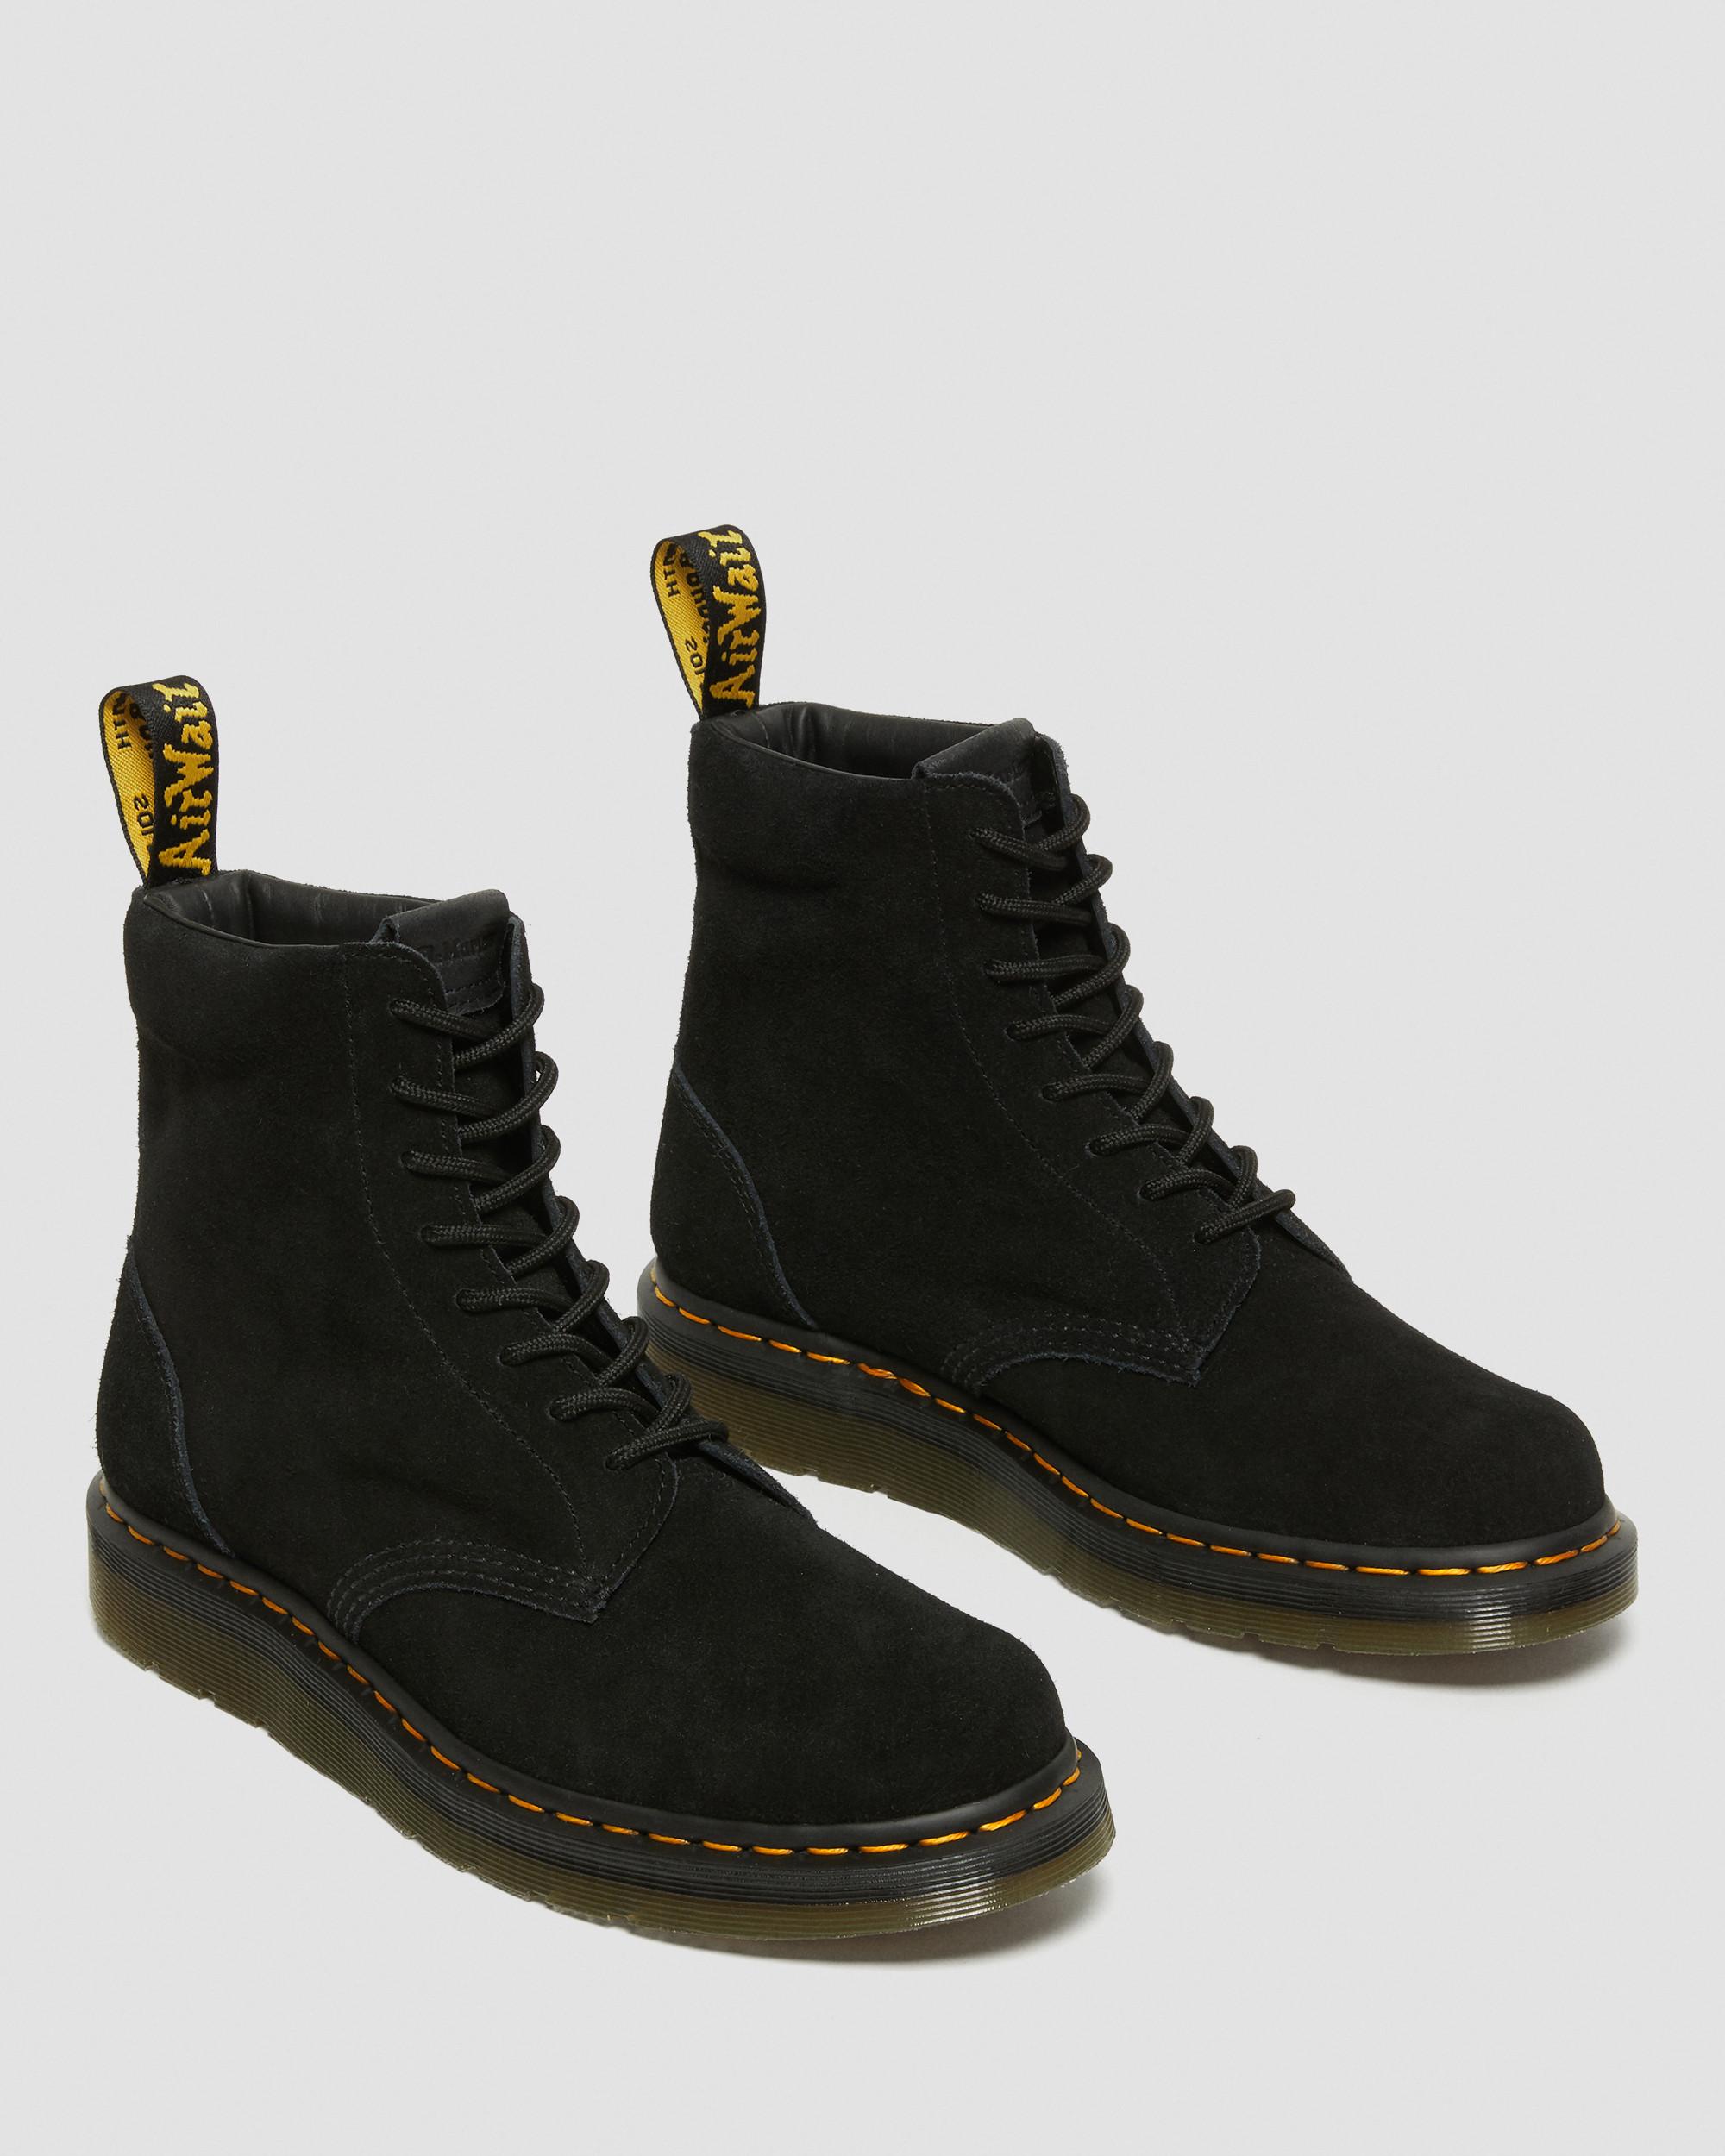 Berman Suede Leather ShoesBerman Suede Leather Boots Dr. Martens